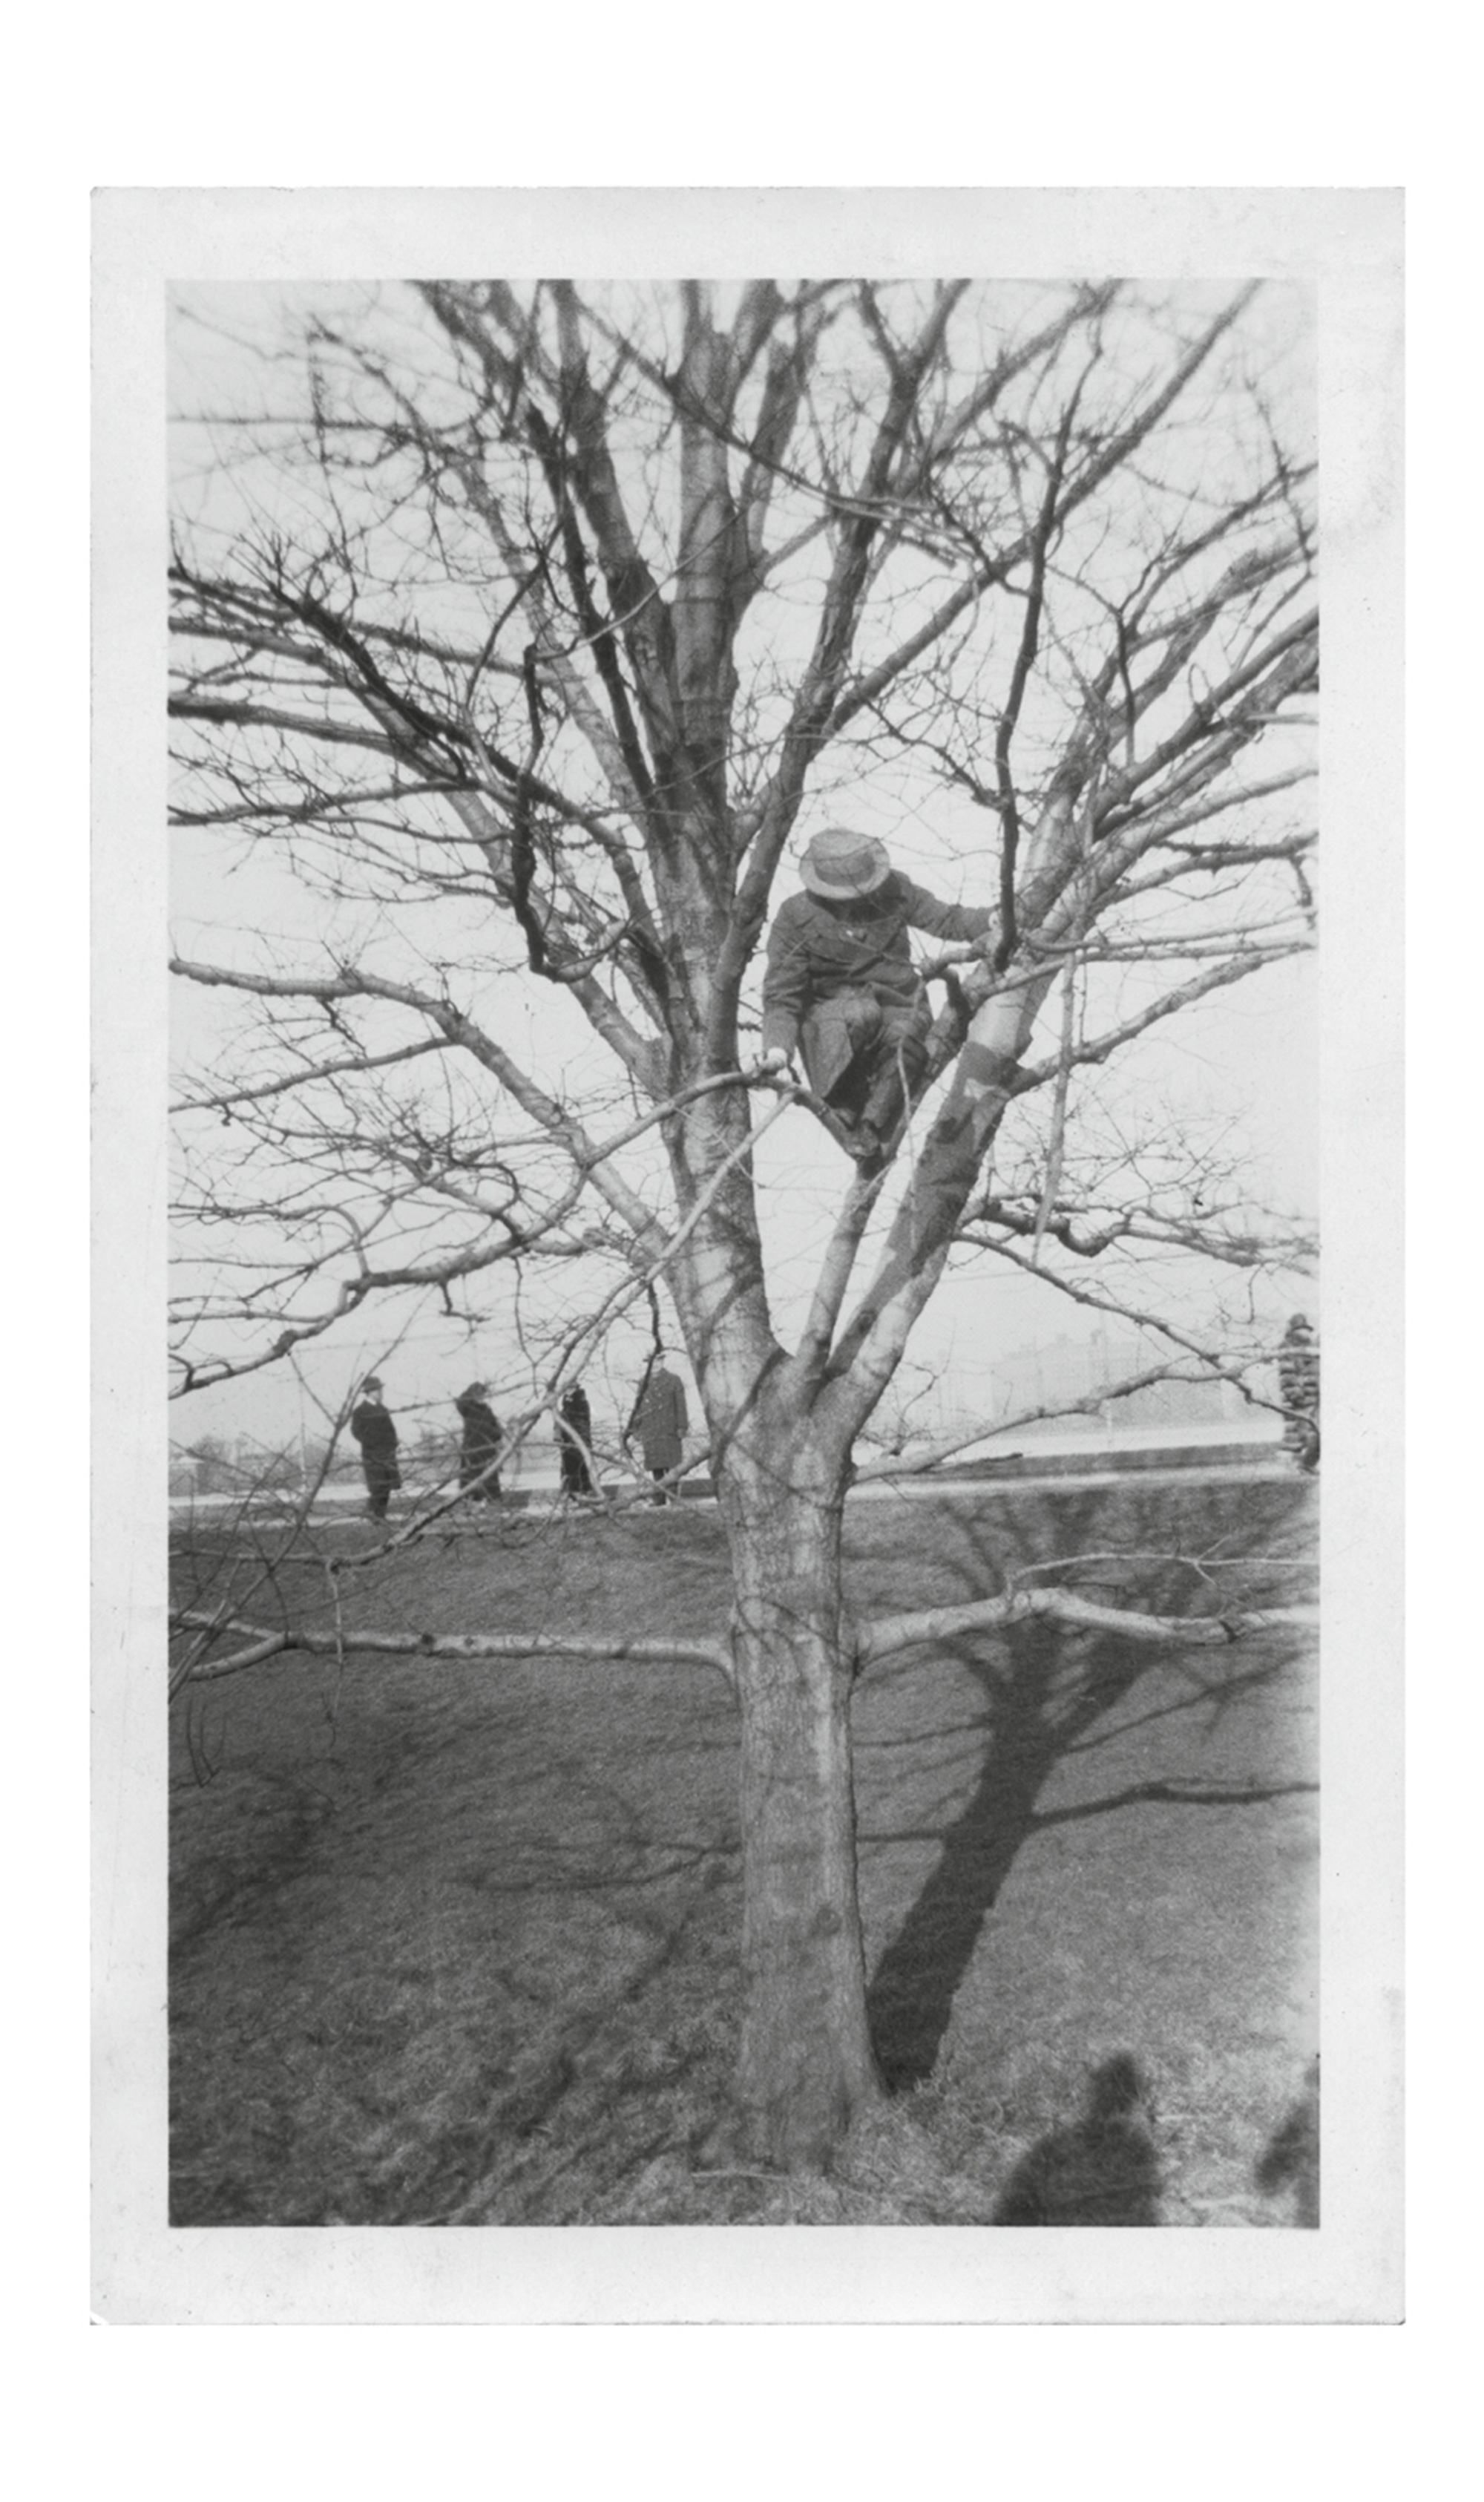 A photograph of a man in a greatcoat and hat climbing a tree.